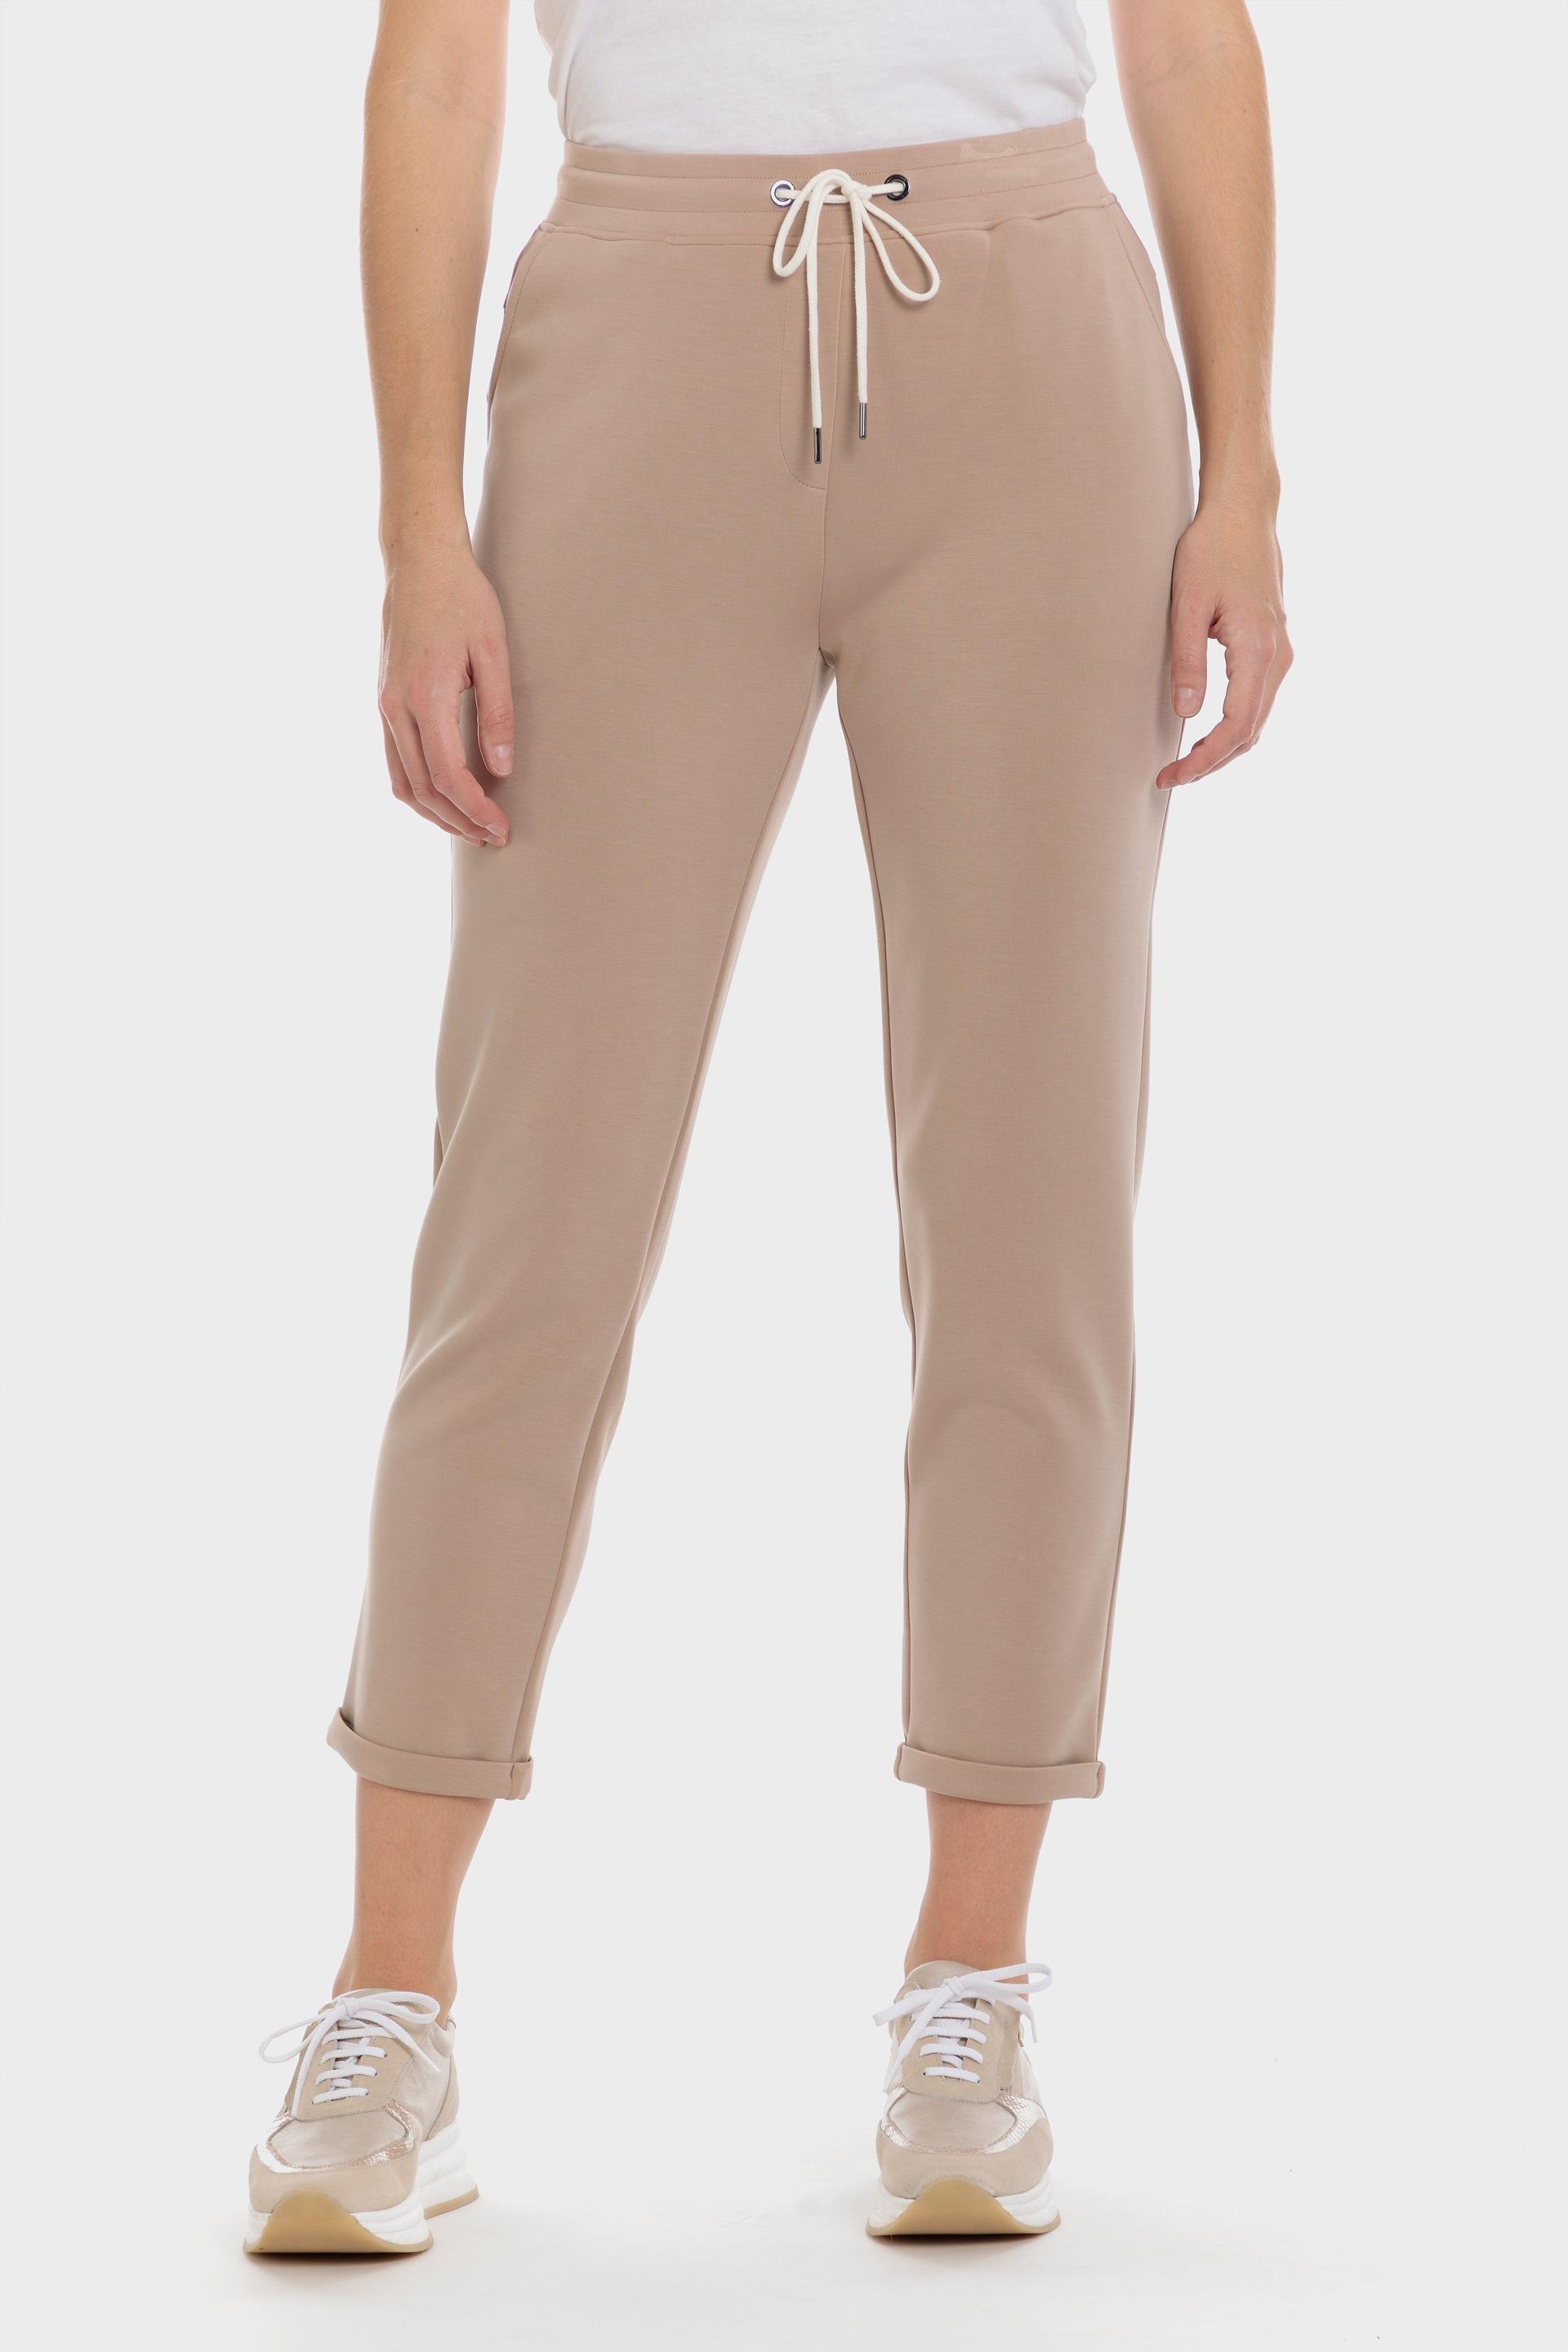 Punt Roma - Brown Comfy Trousers